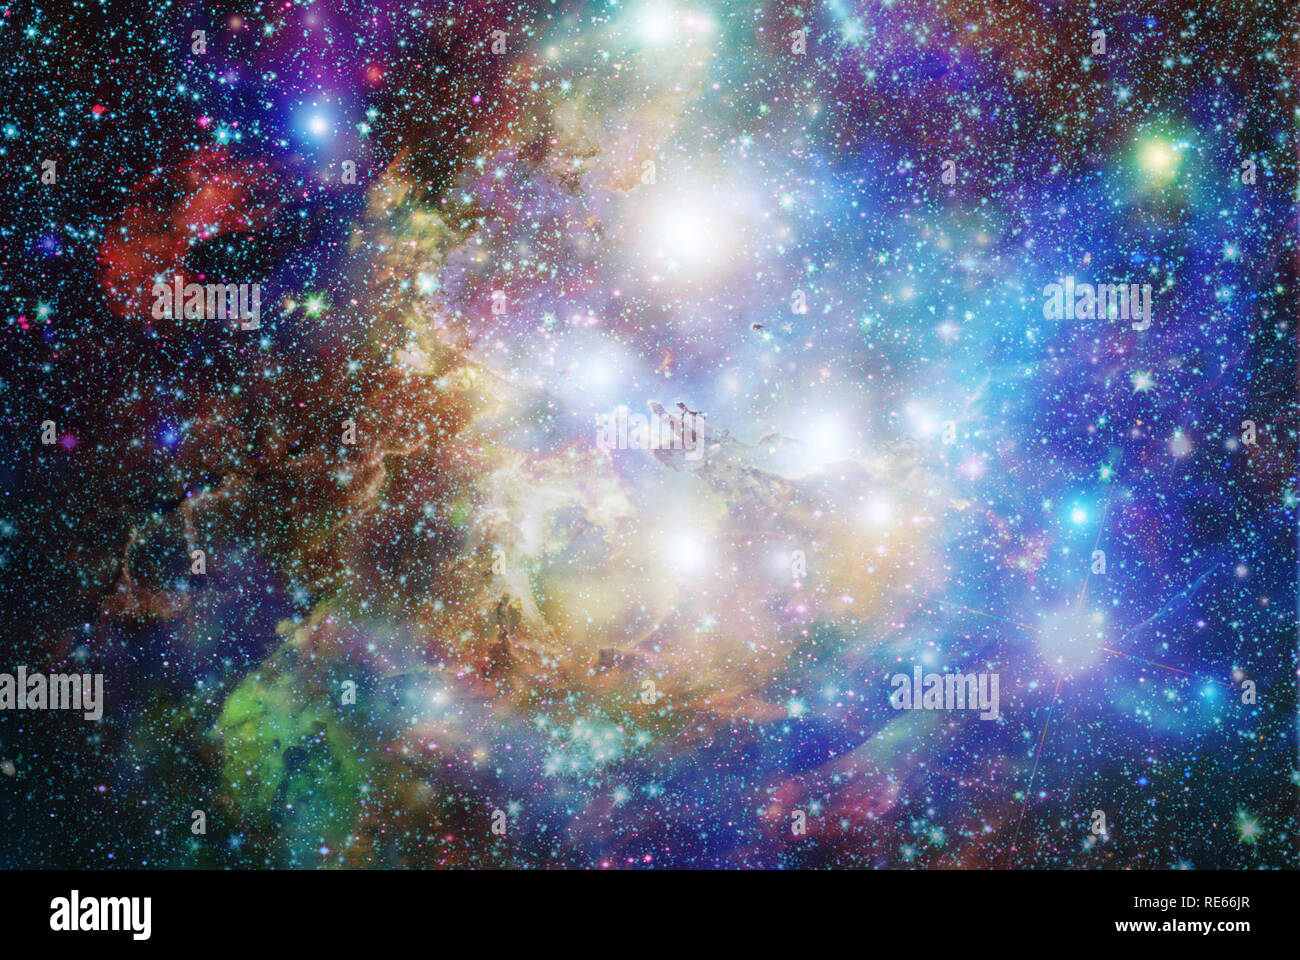 composite of various space, nebula and stars images Stock Photo